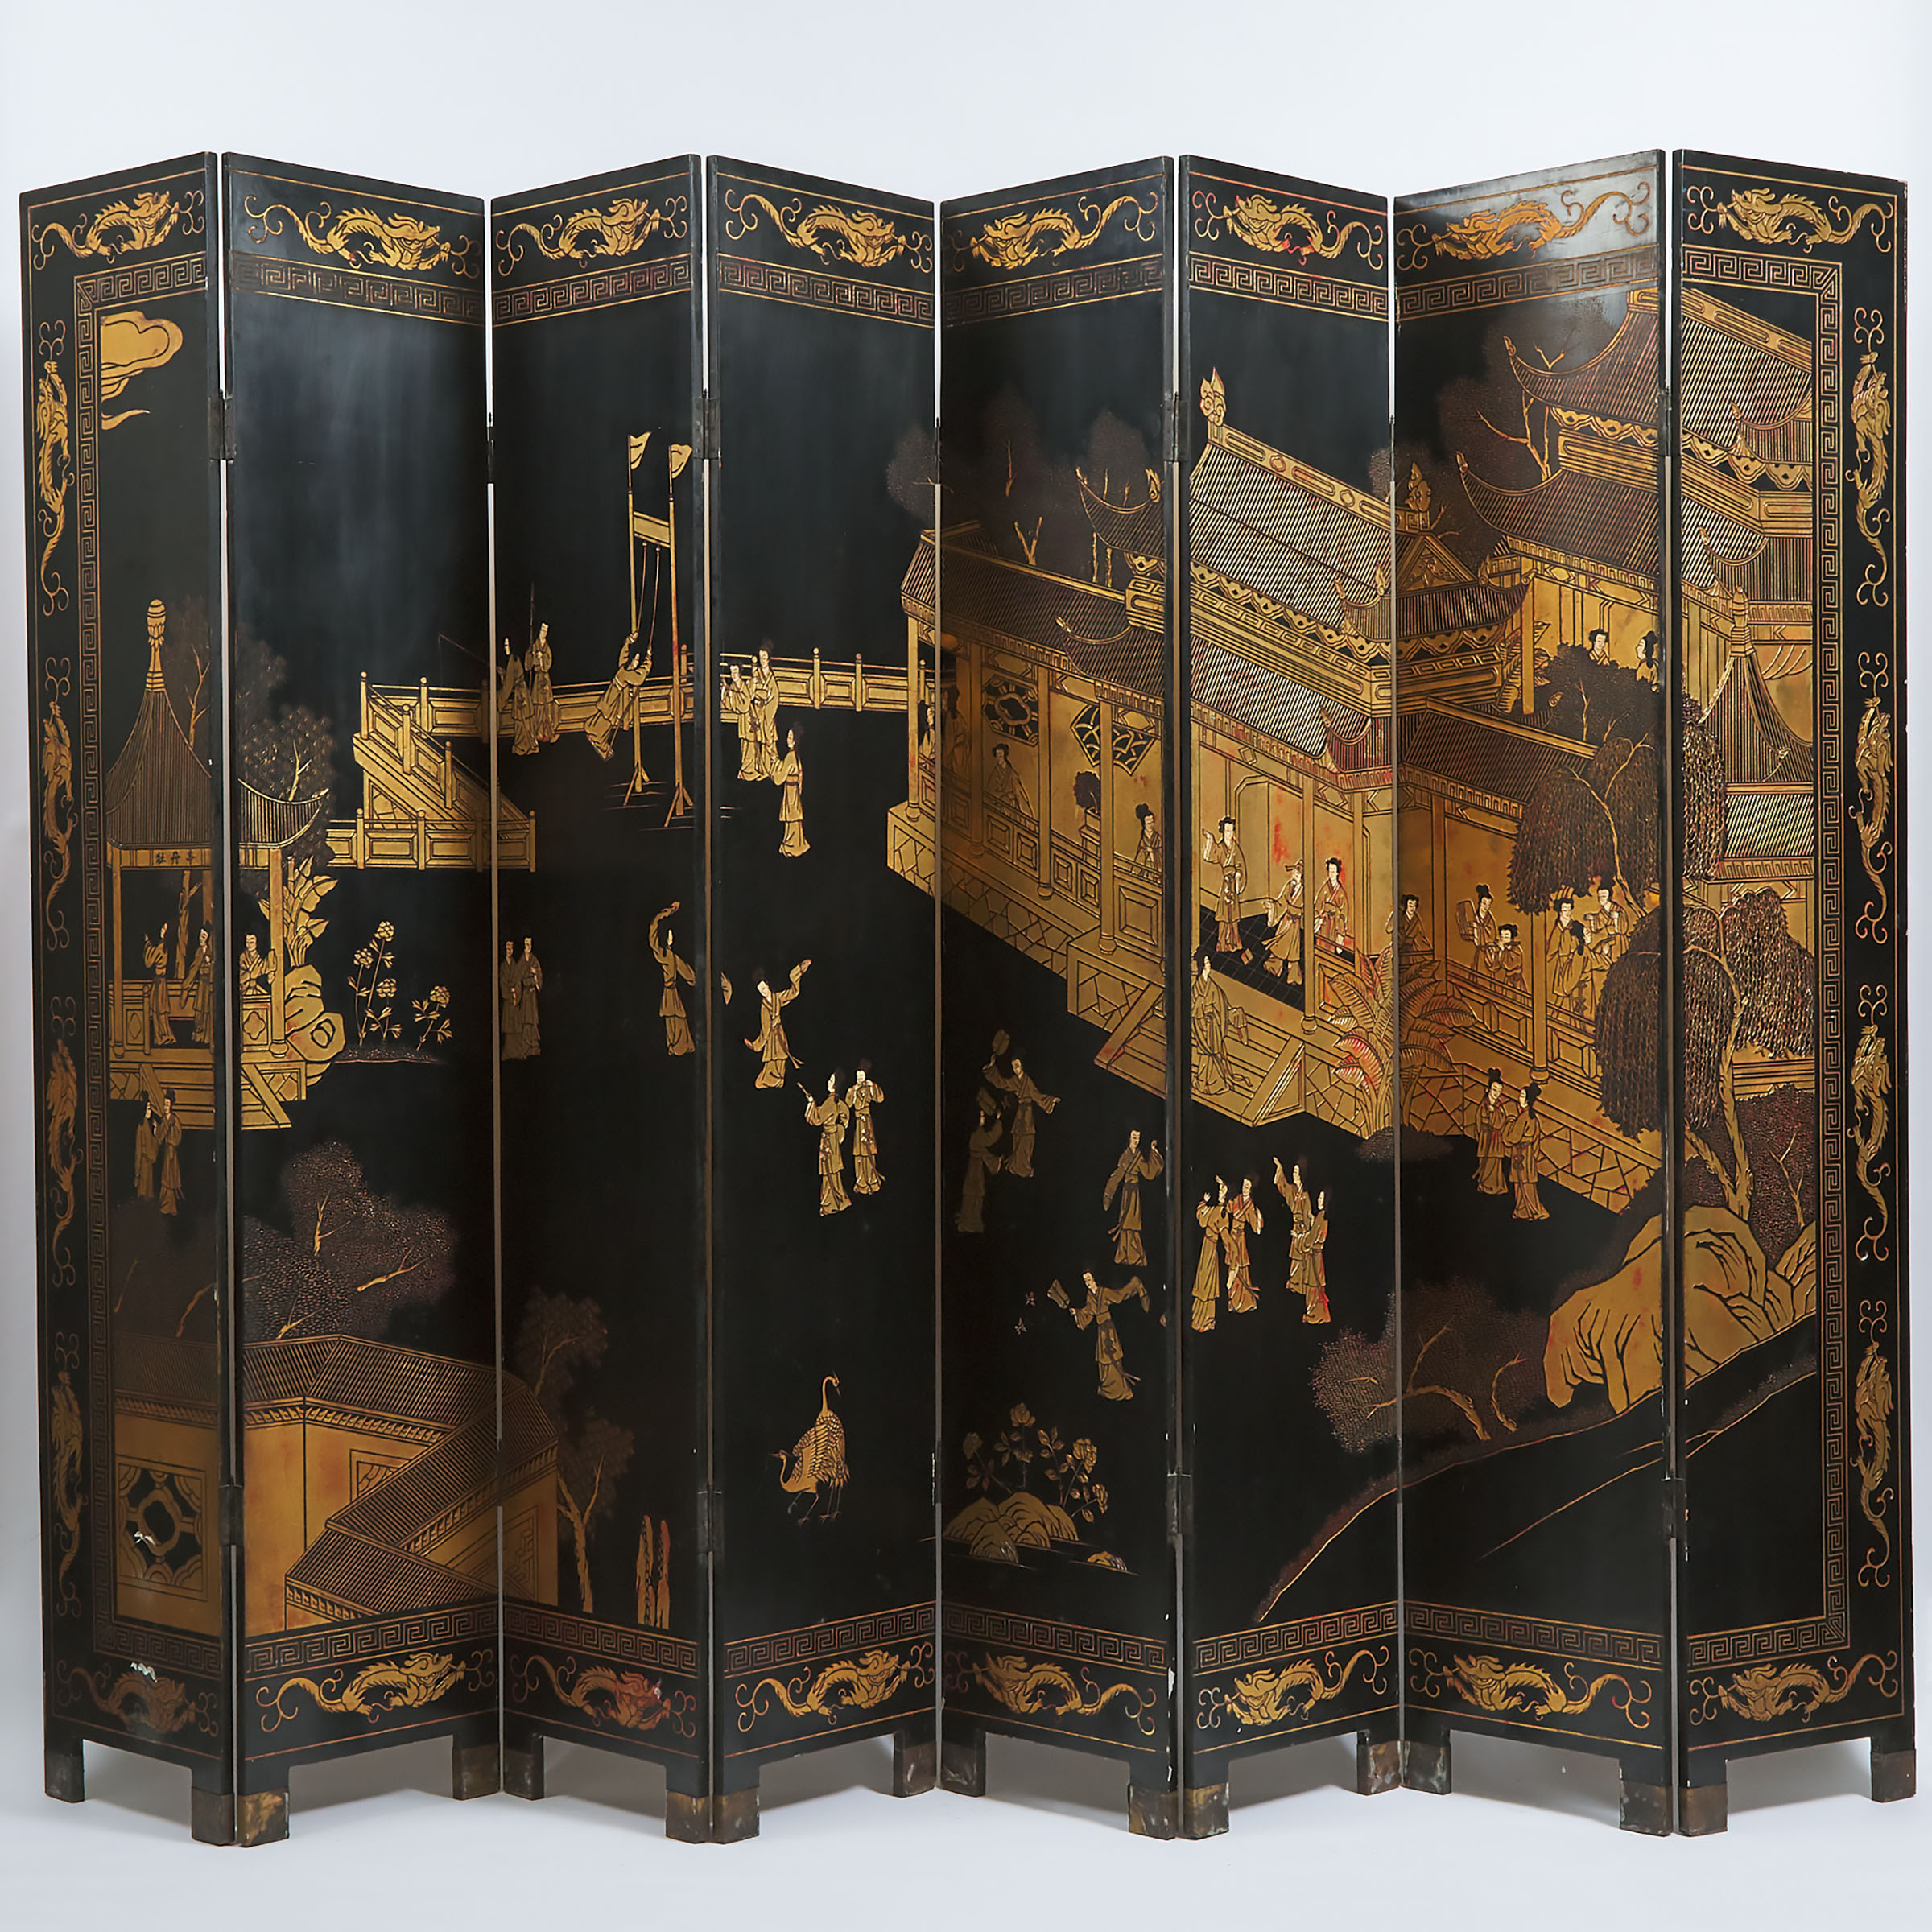 An Eight-Panel Coromandel Lacquer Screen, Early to Mid 20th Century